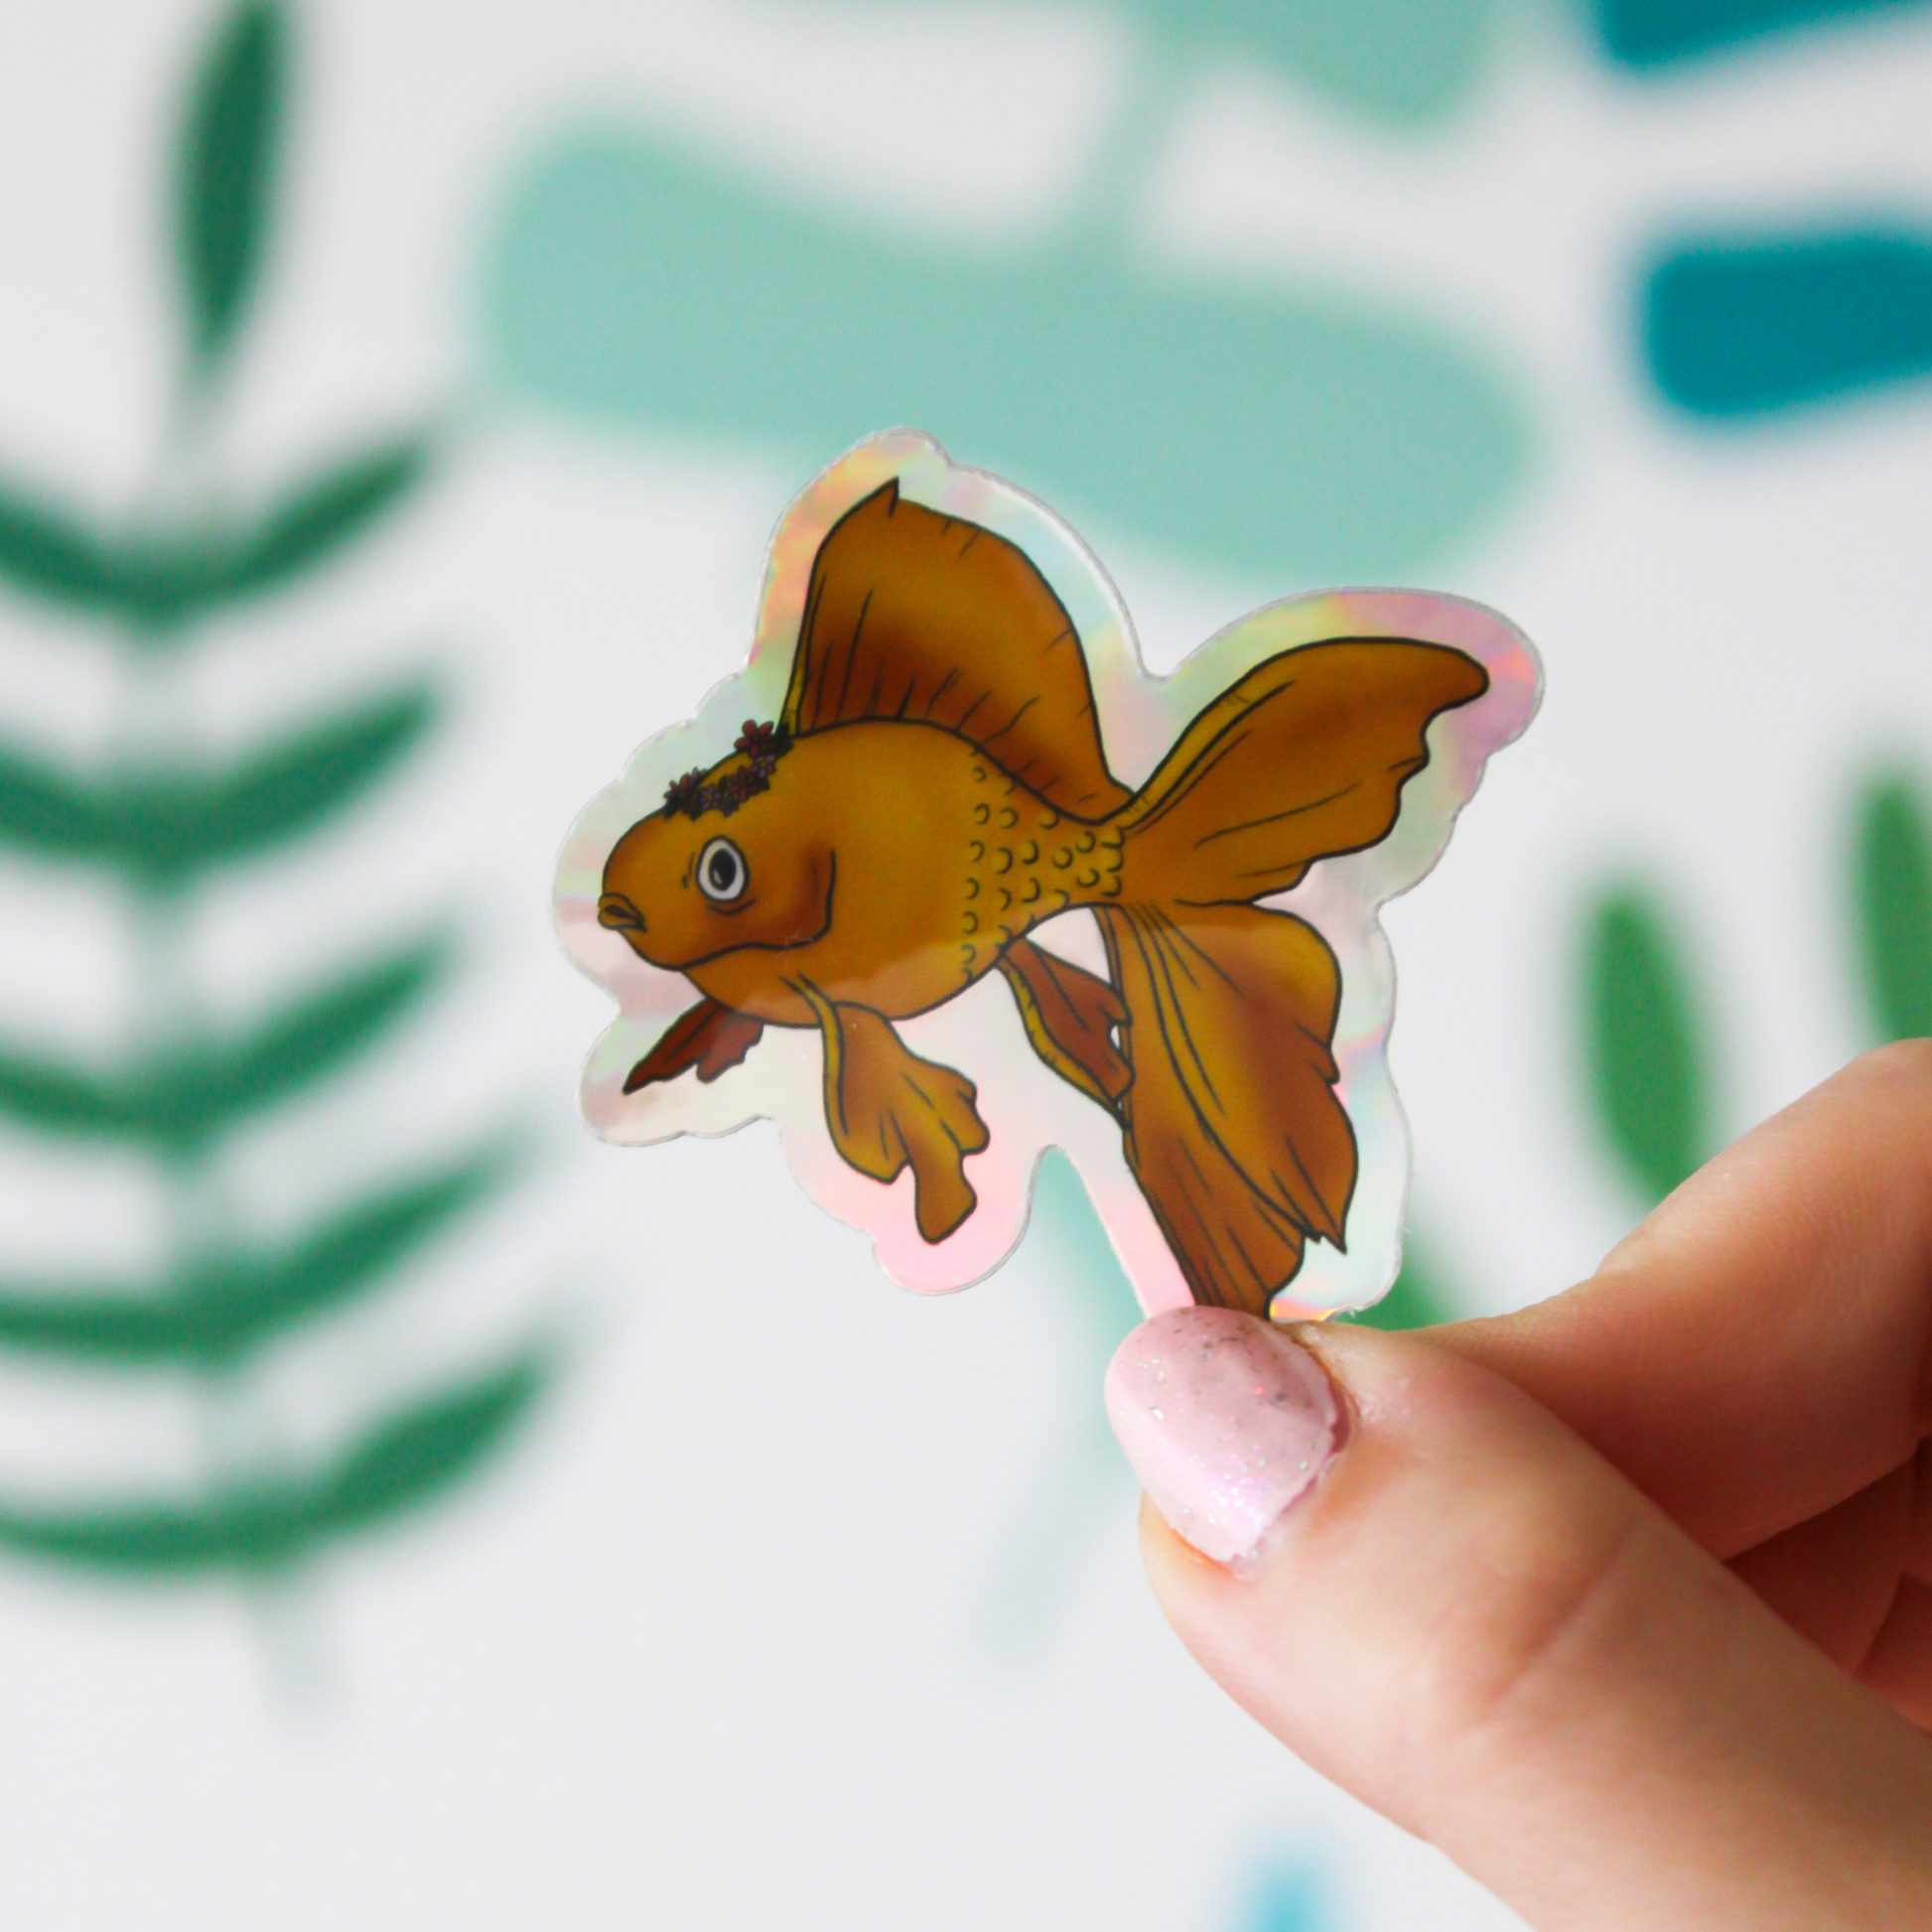 A blurred leaf pattern background. In the front is a hand holding a holographic sticker that has an orange goldfish wearing a pink flower crown.